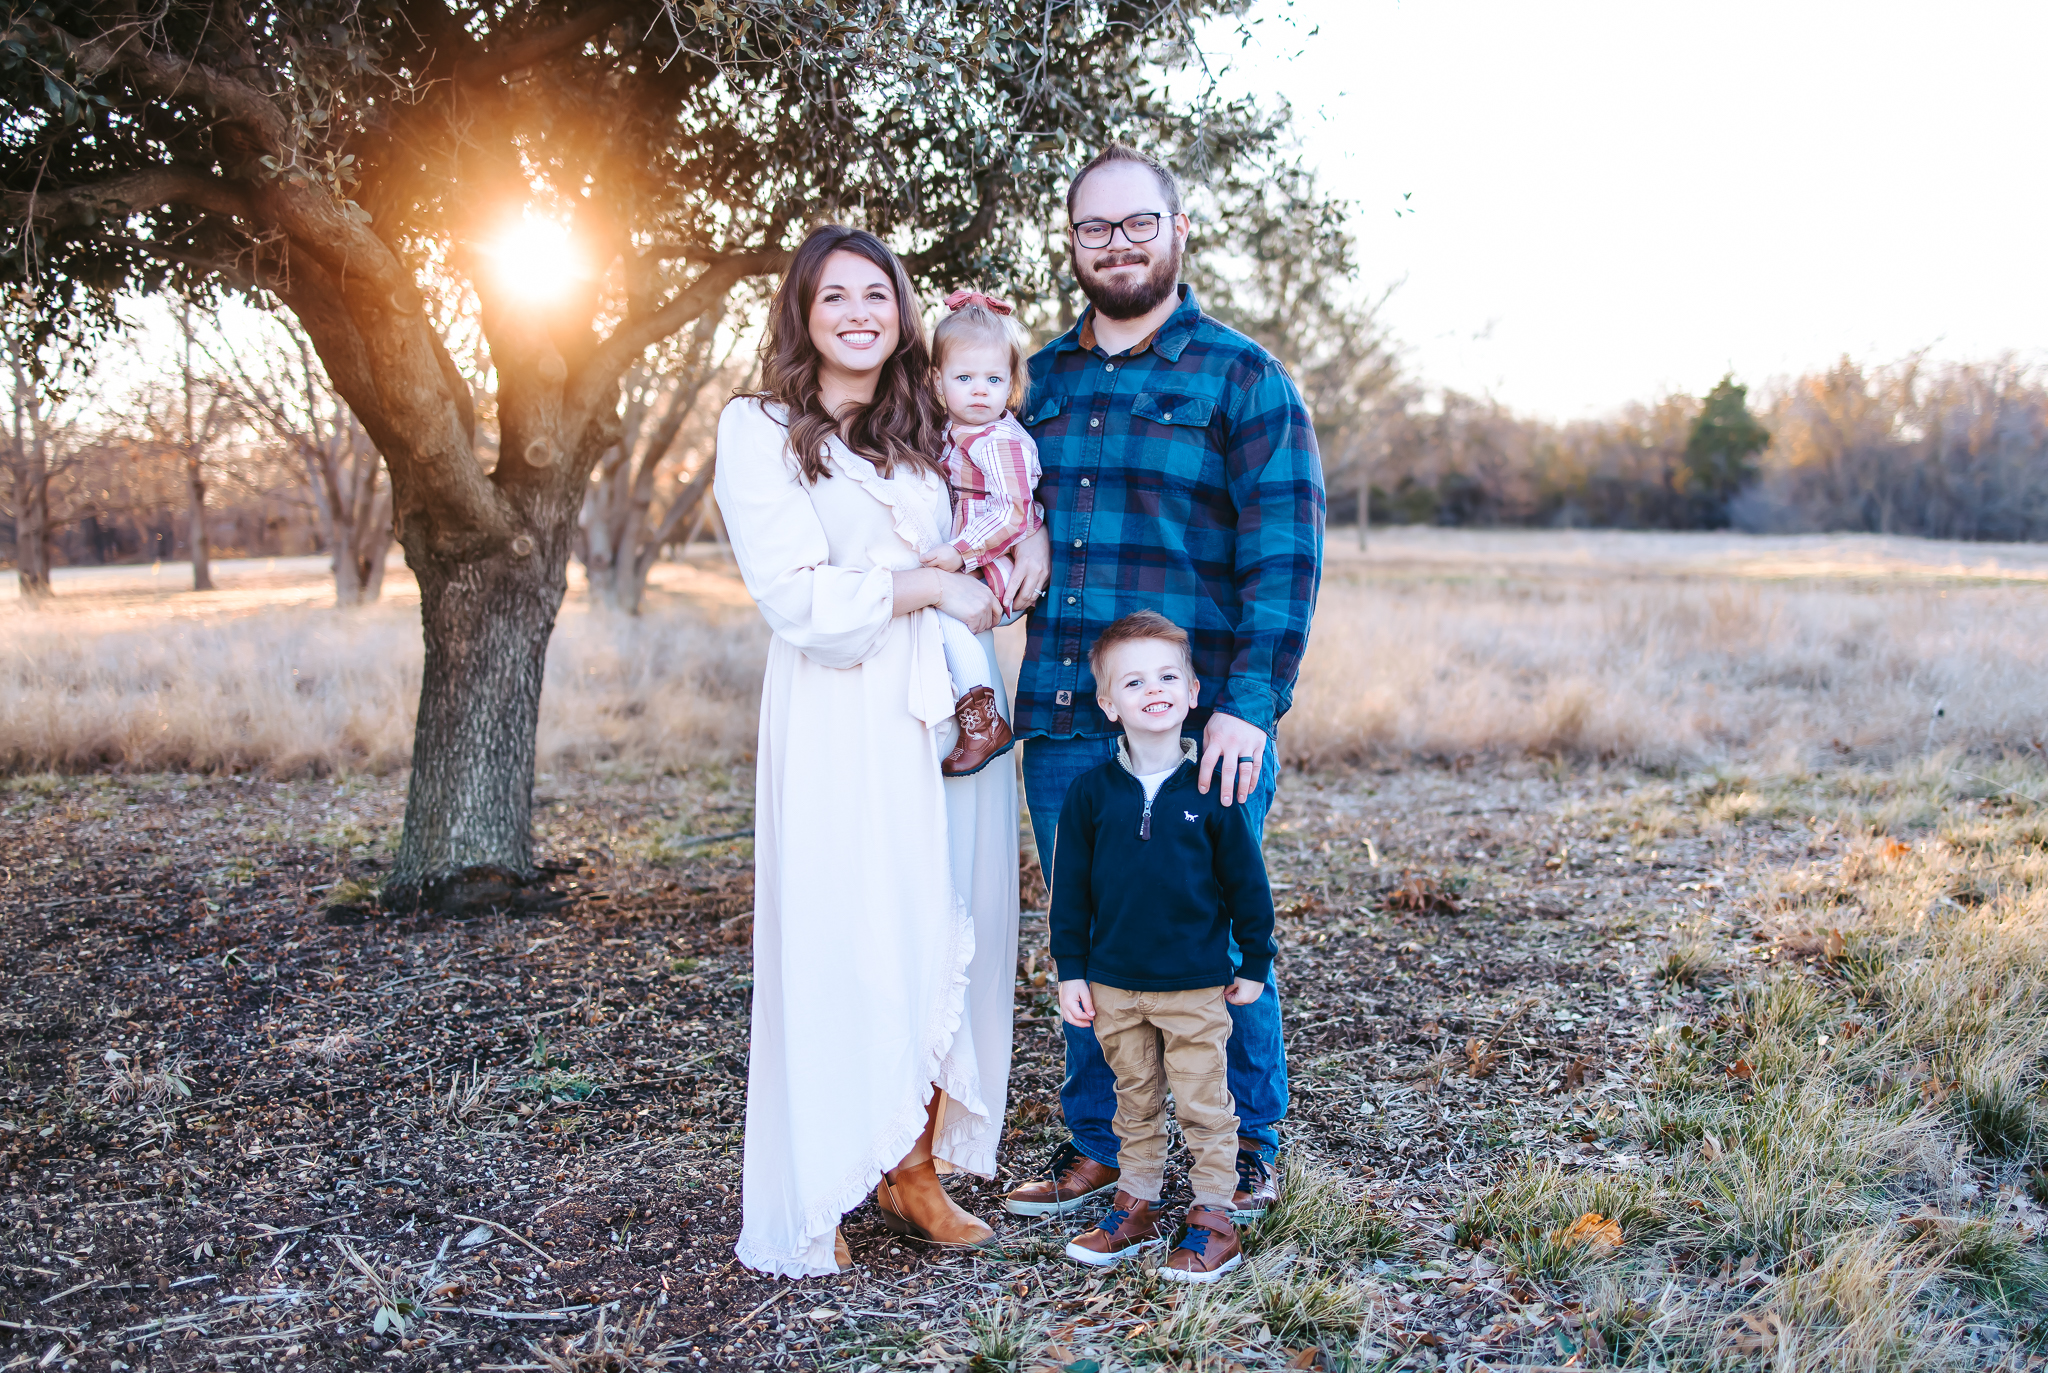 Plano Fall Family Photography Session during Golden Hour